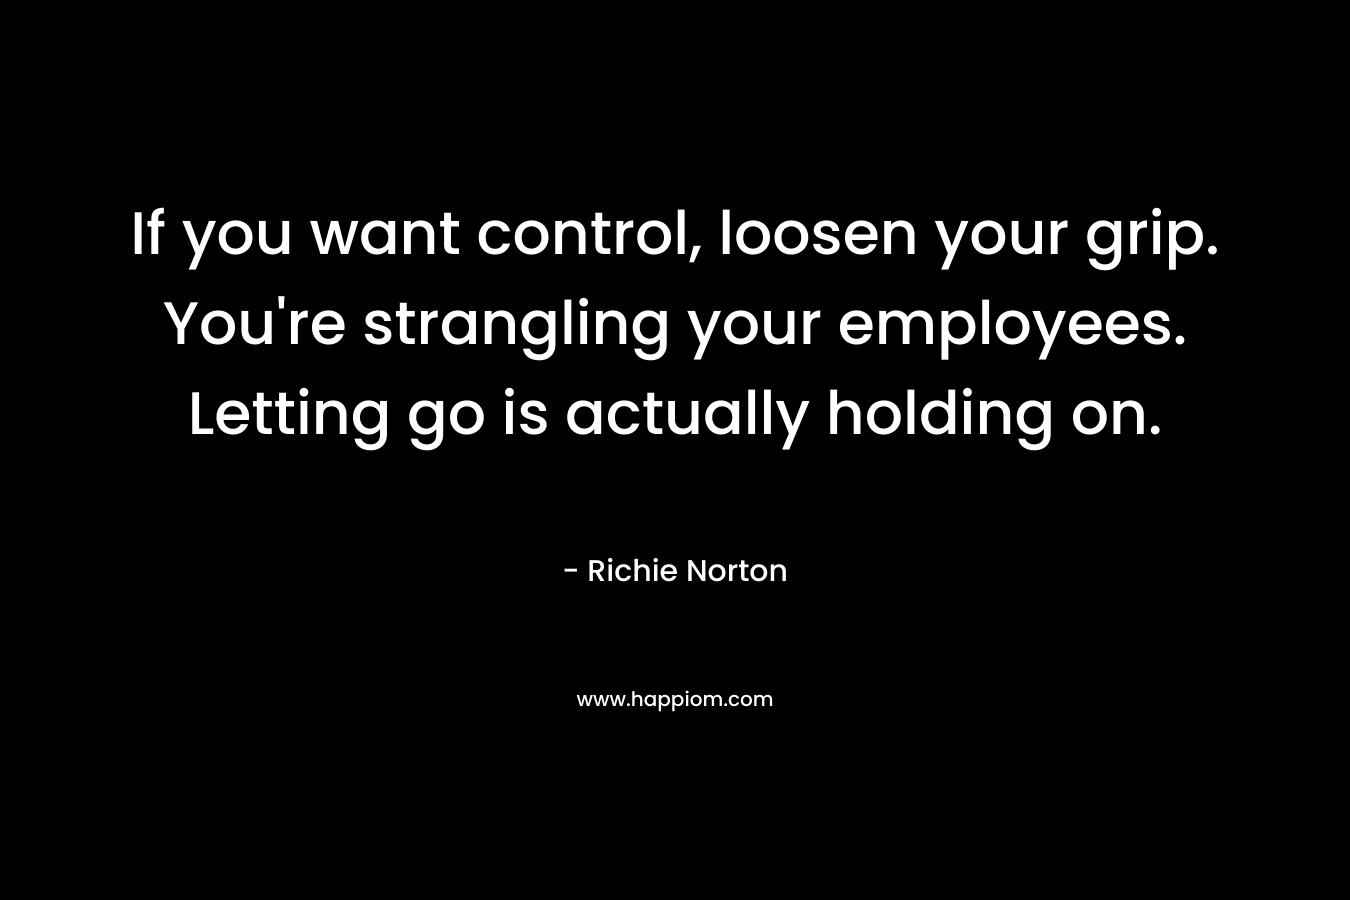 If you want control, loosen your grip. You're strangling your employees. Letting go is actually holding on.